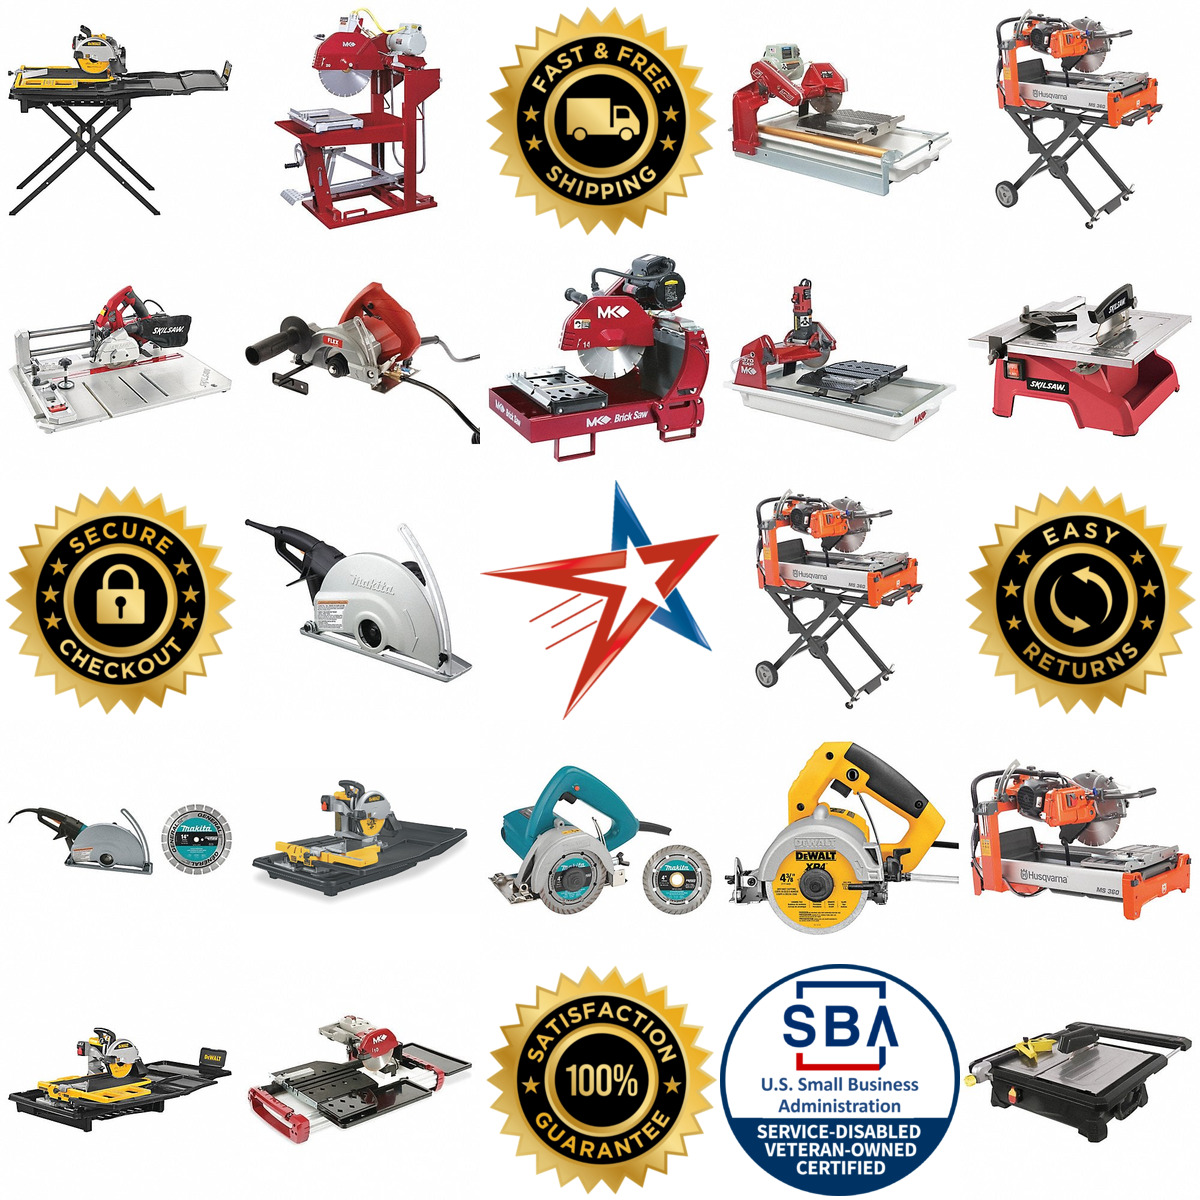 A selection of Corded Flooring Masonry and Tile Saws products on GoVets